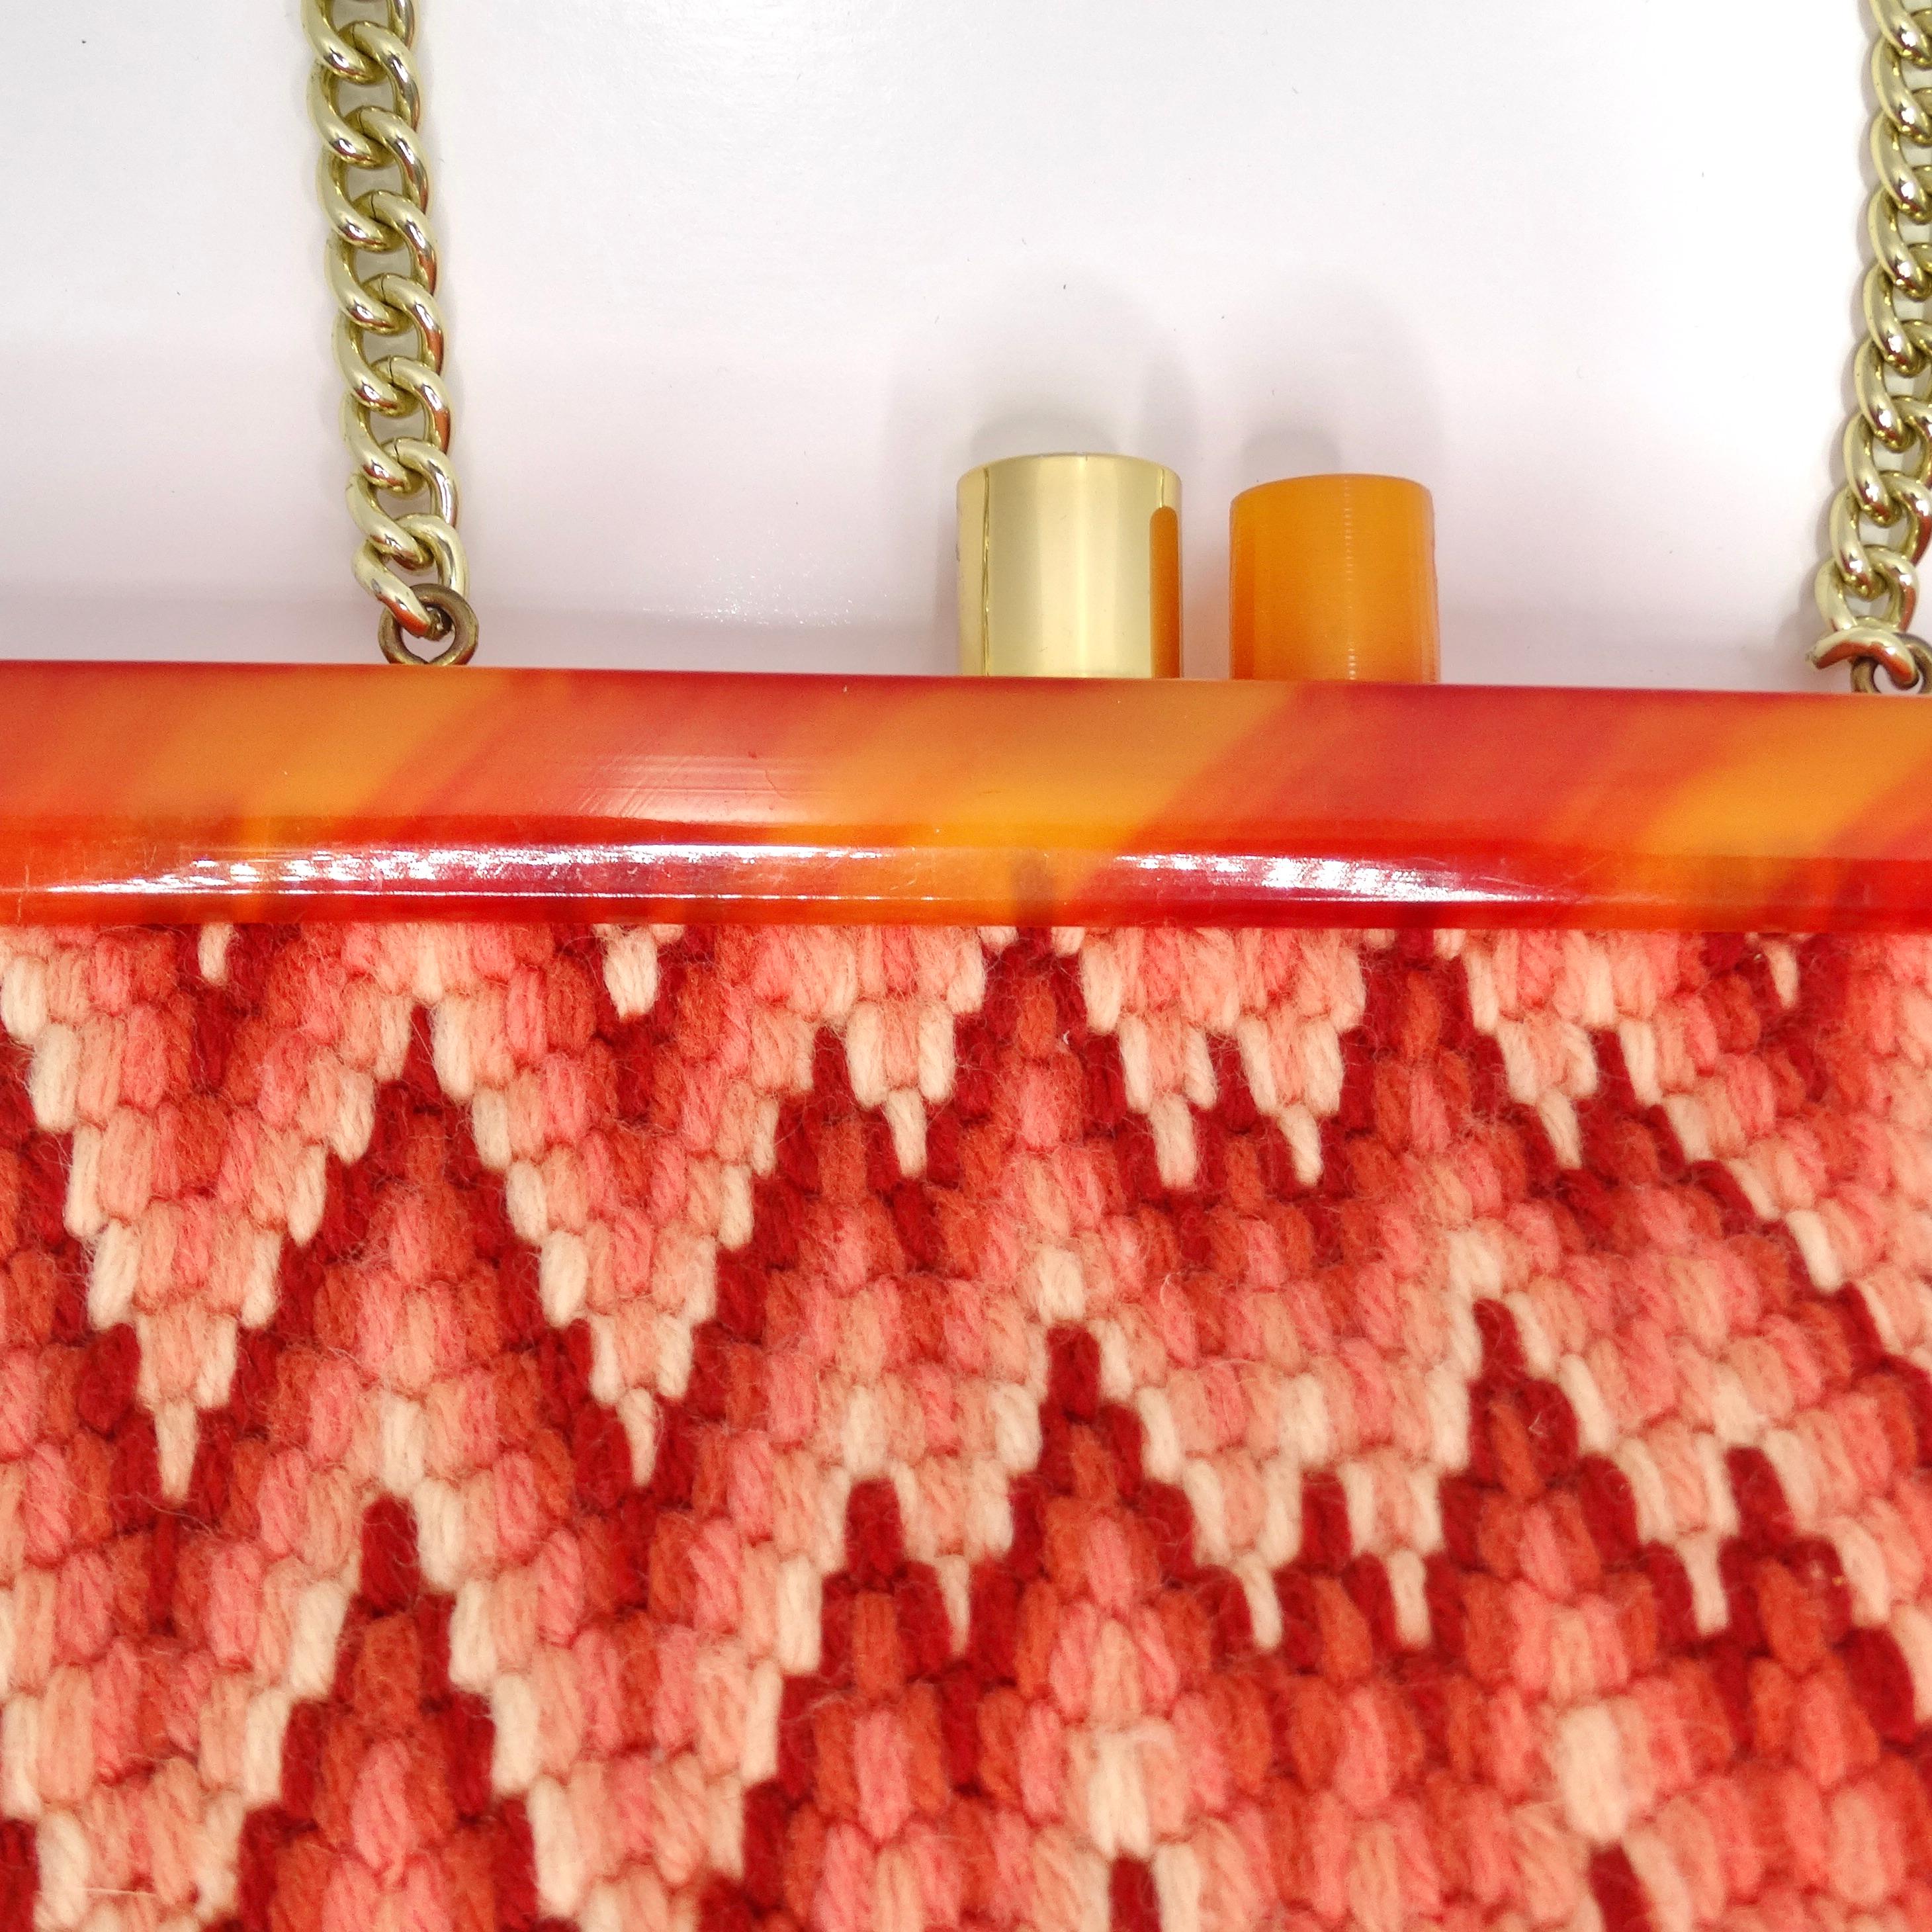 Step into the retro chic of the 1970s with the Orange Knit Shoulder Bag – a vibrant and fun accessory that adds a pop of color to your ensemble. This knitted shoulder bag showcases a gradient burnt orange and peach chevron print, creating a playful